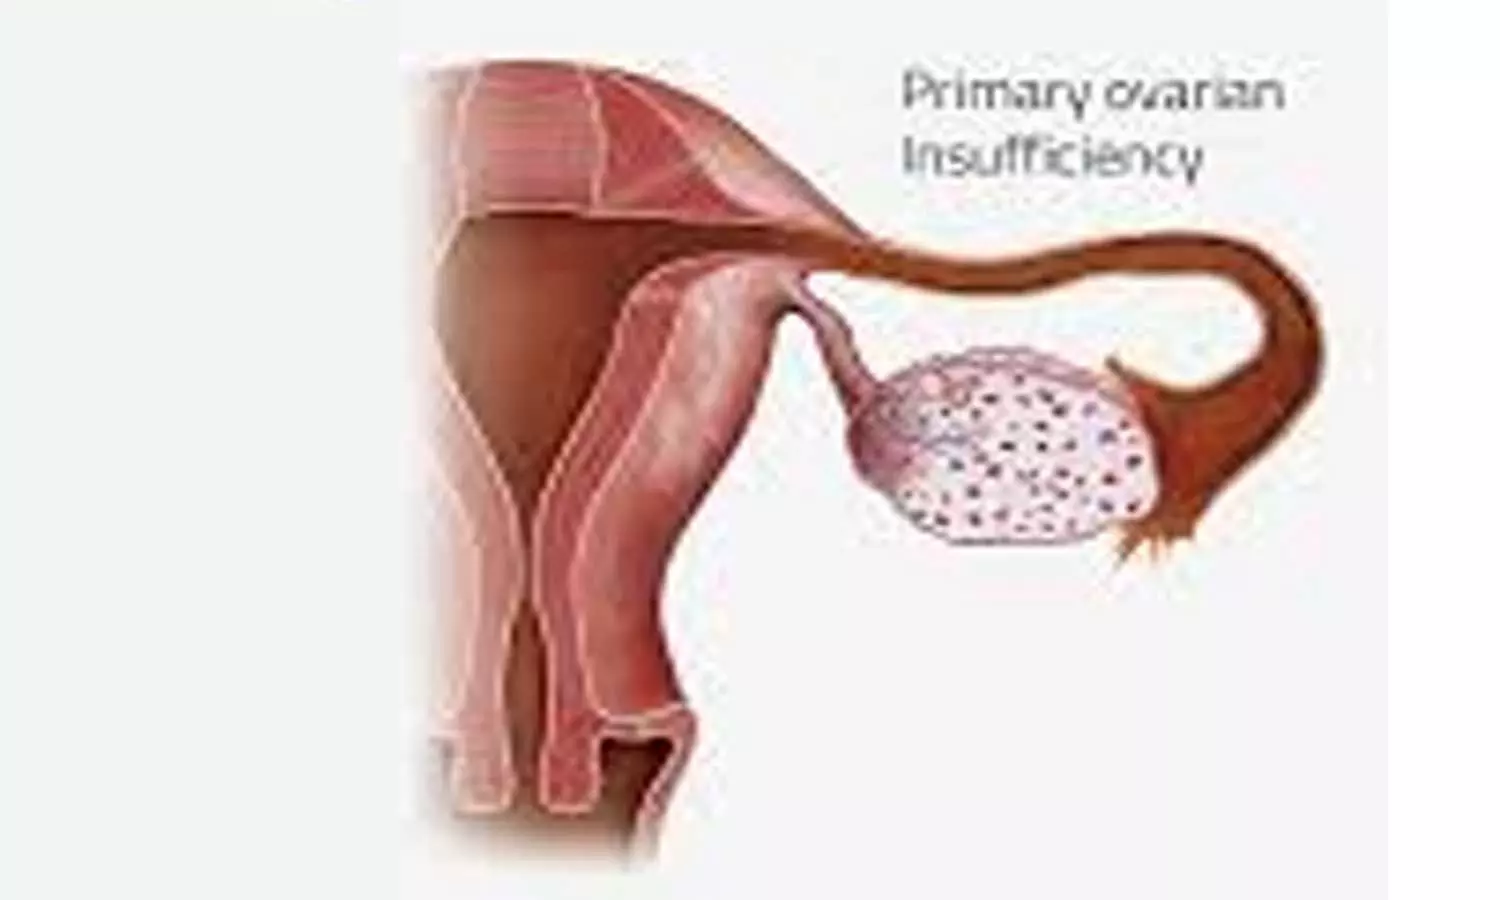 Primary ovarian insufficiency not linked to obesity and diabetes: Study